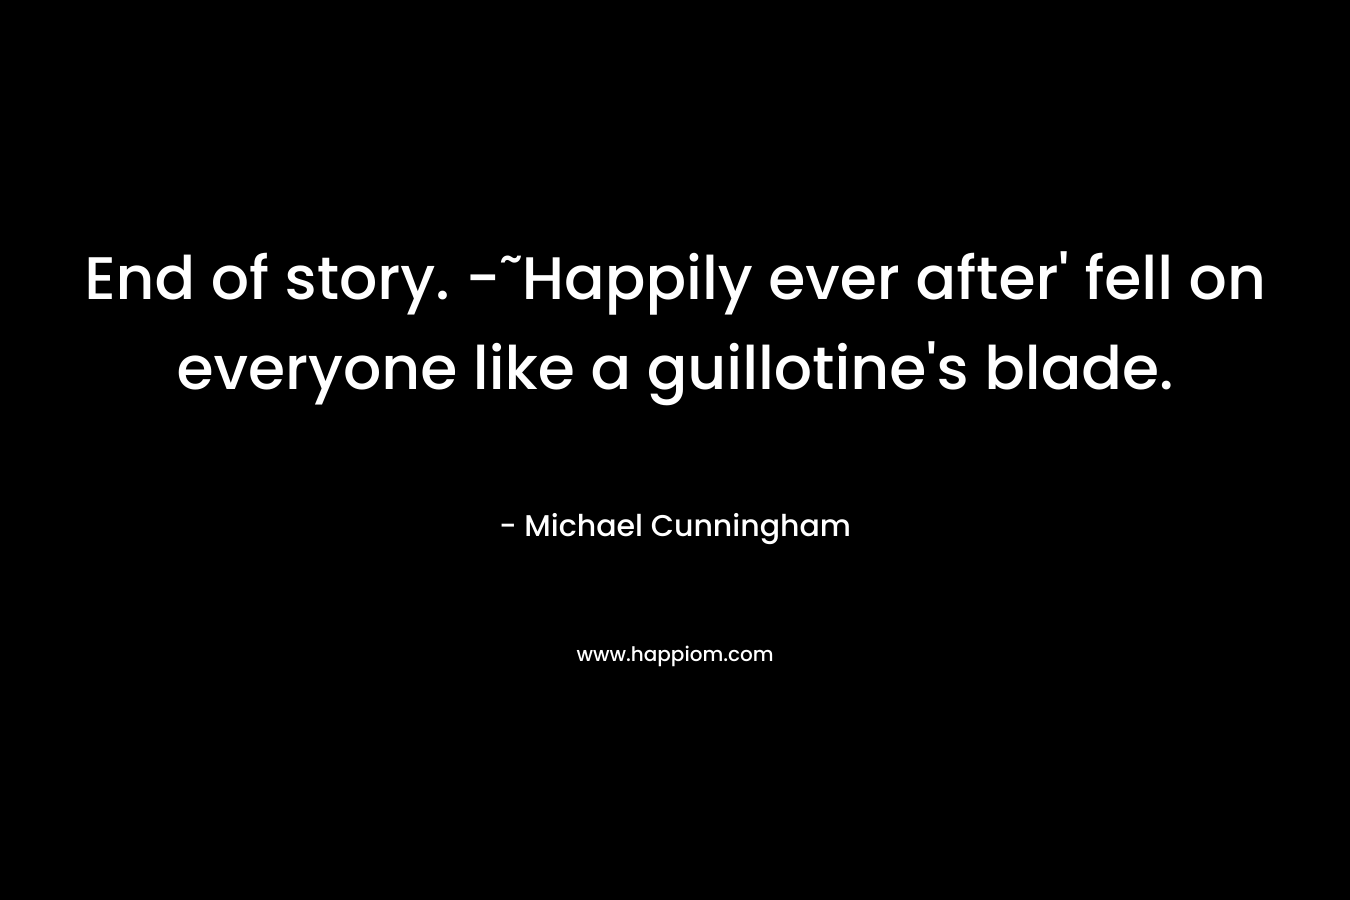 End of story. -˜Happily ever after’ fell on everyone like a guillotine’s blade. – Michael Cunningham